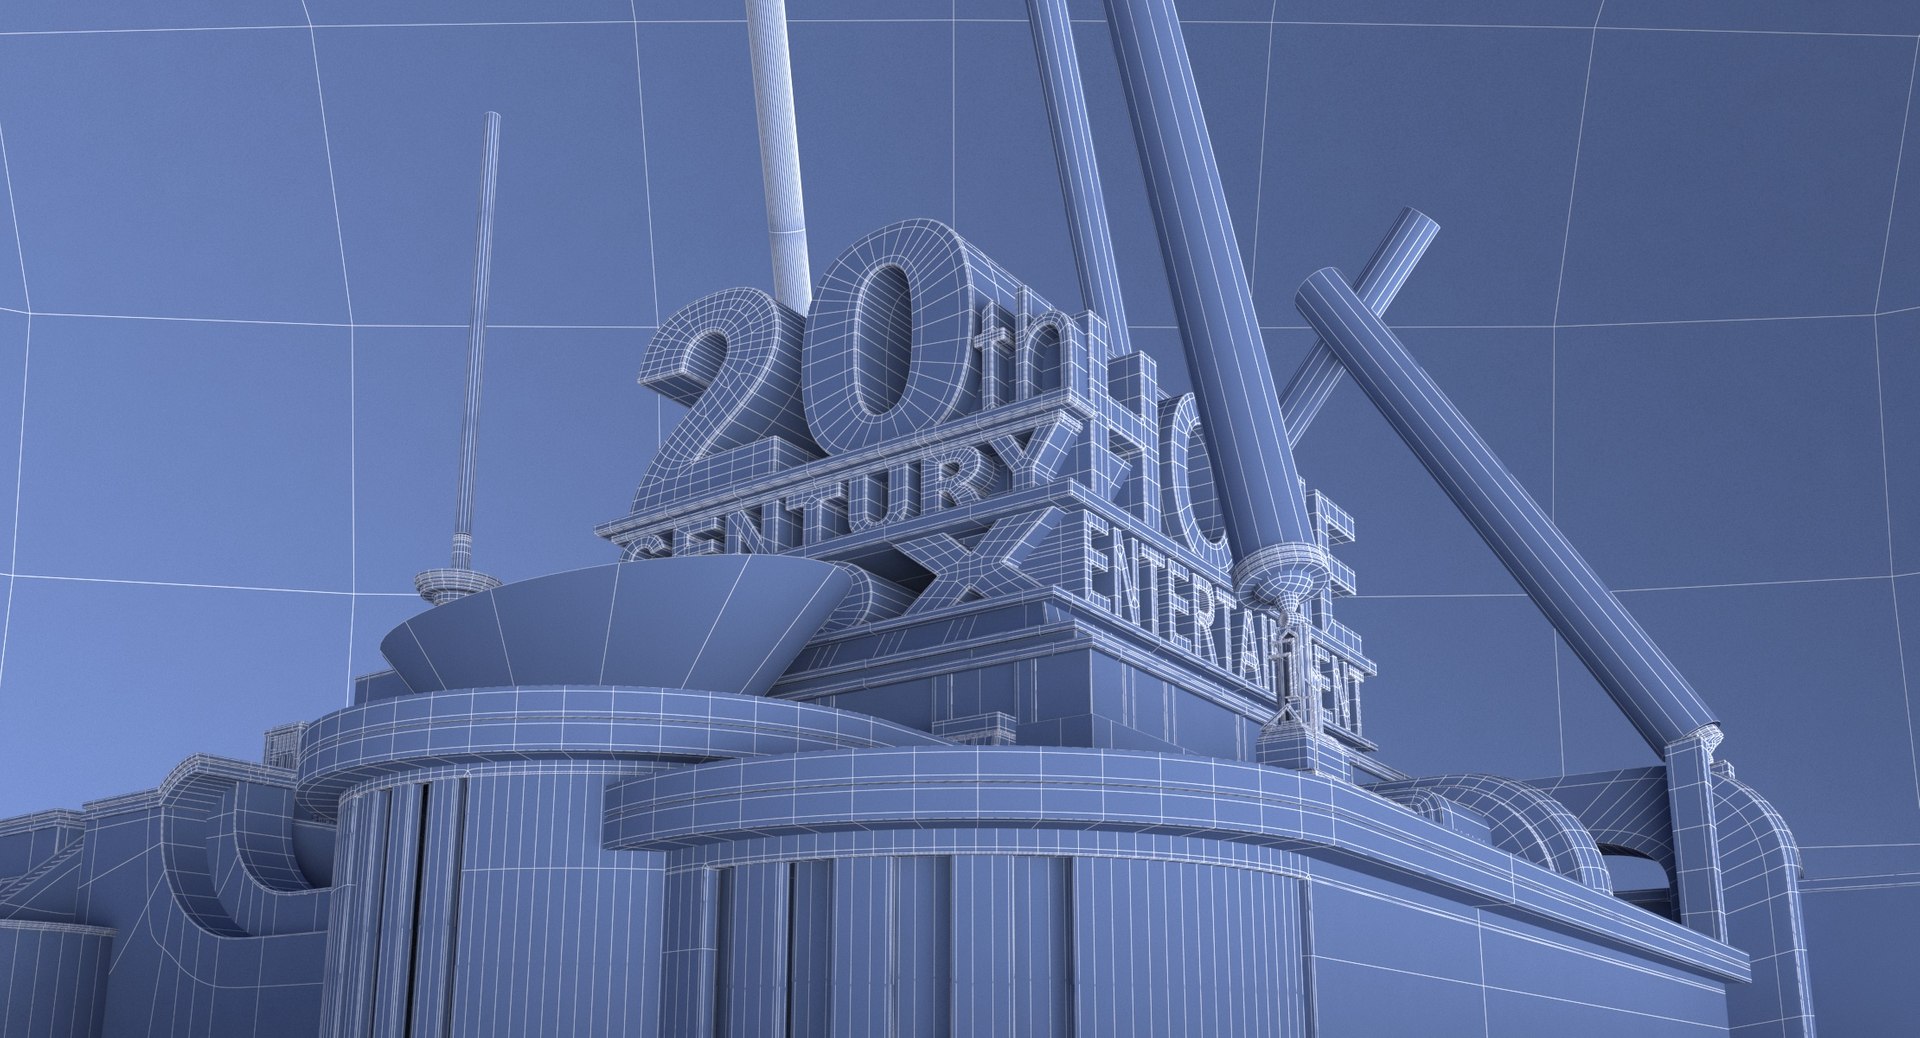 20th century fox history (made in sketchup) 